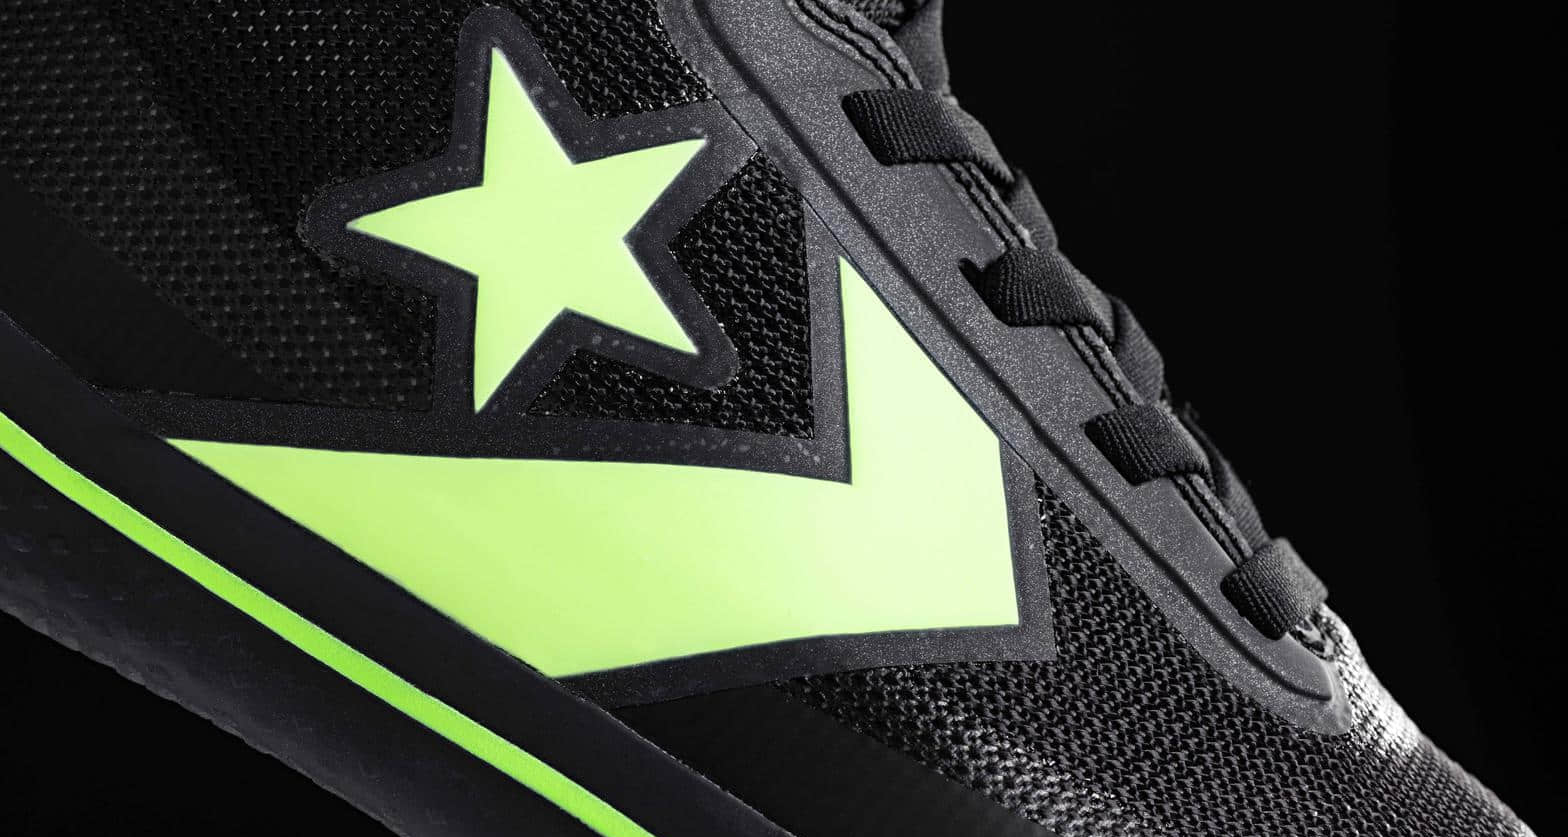 Converse All Star Pro BB High 'Hyperbright' - Iconic Basketball Sneakers